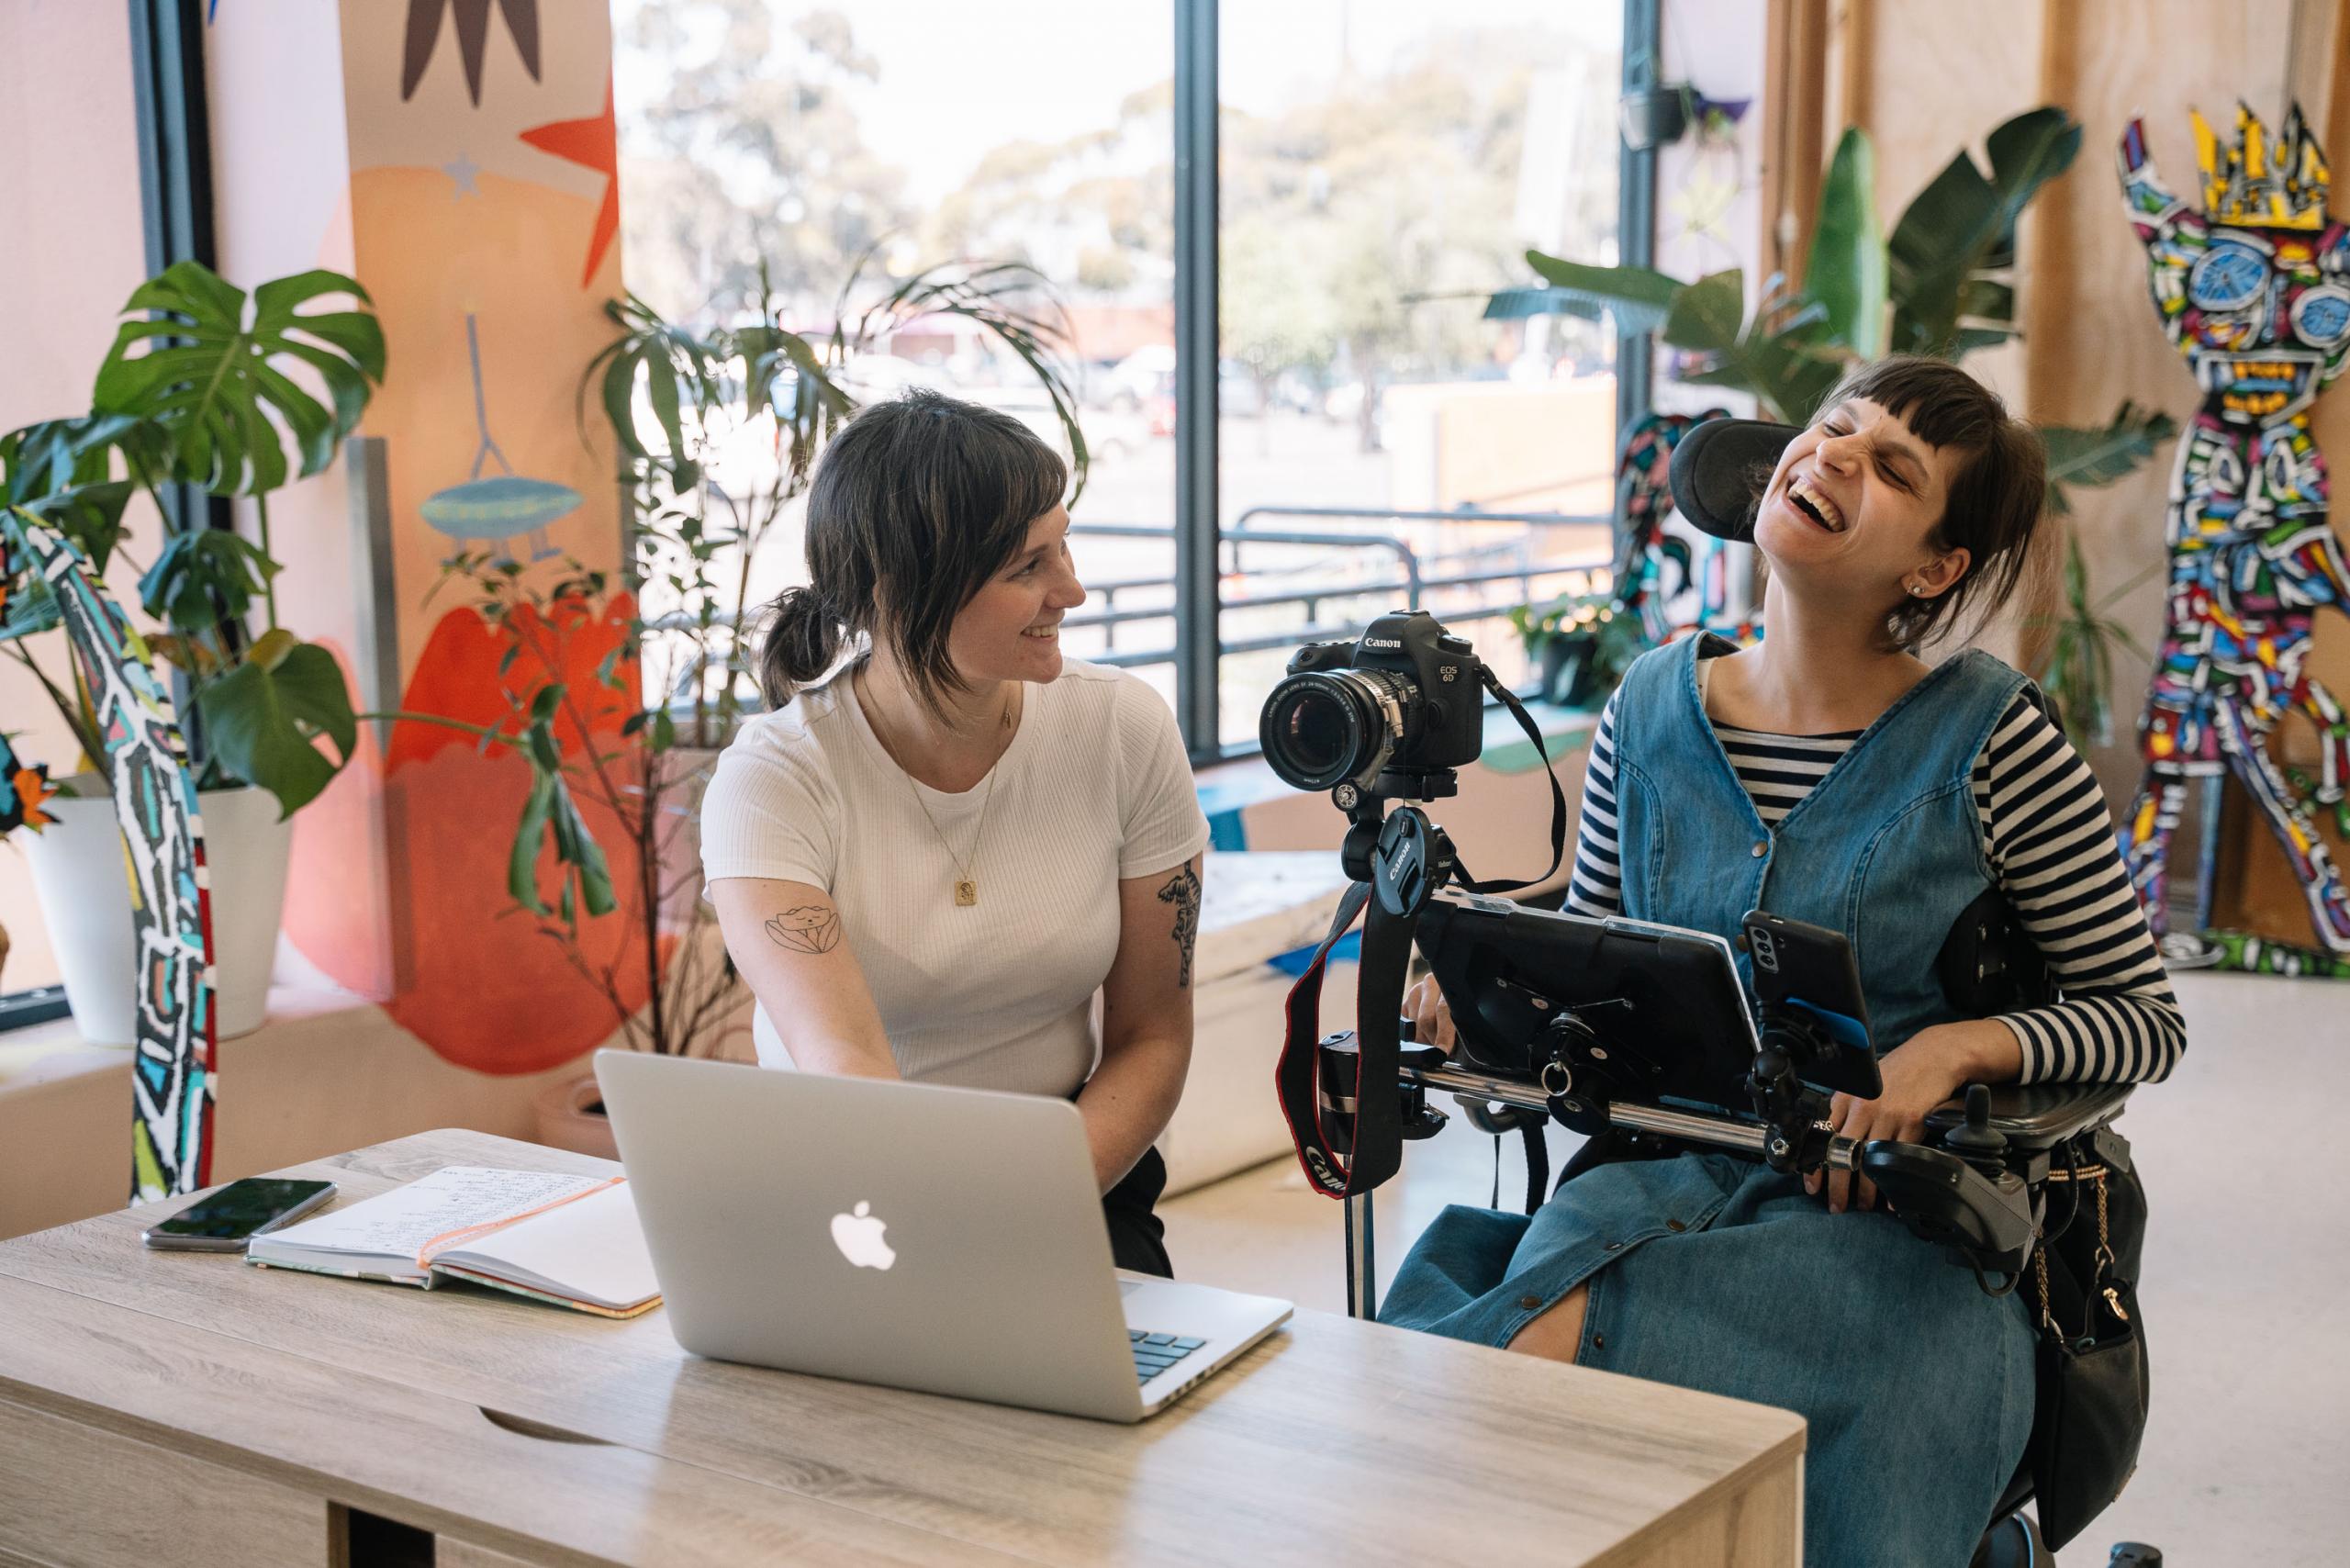 Hannah, a white woman with brown hair, sits next to Nicole, who is a woman in a wheelchair with a camera attached to it. Nic has olive skin and brown hair and is wearing a denim dress over a long sleeved striped top. Hannah is wearing black pants and a white t-shirt.